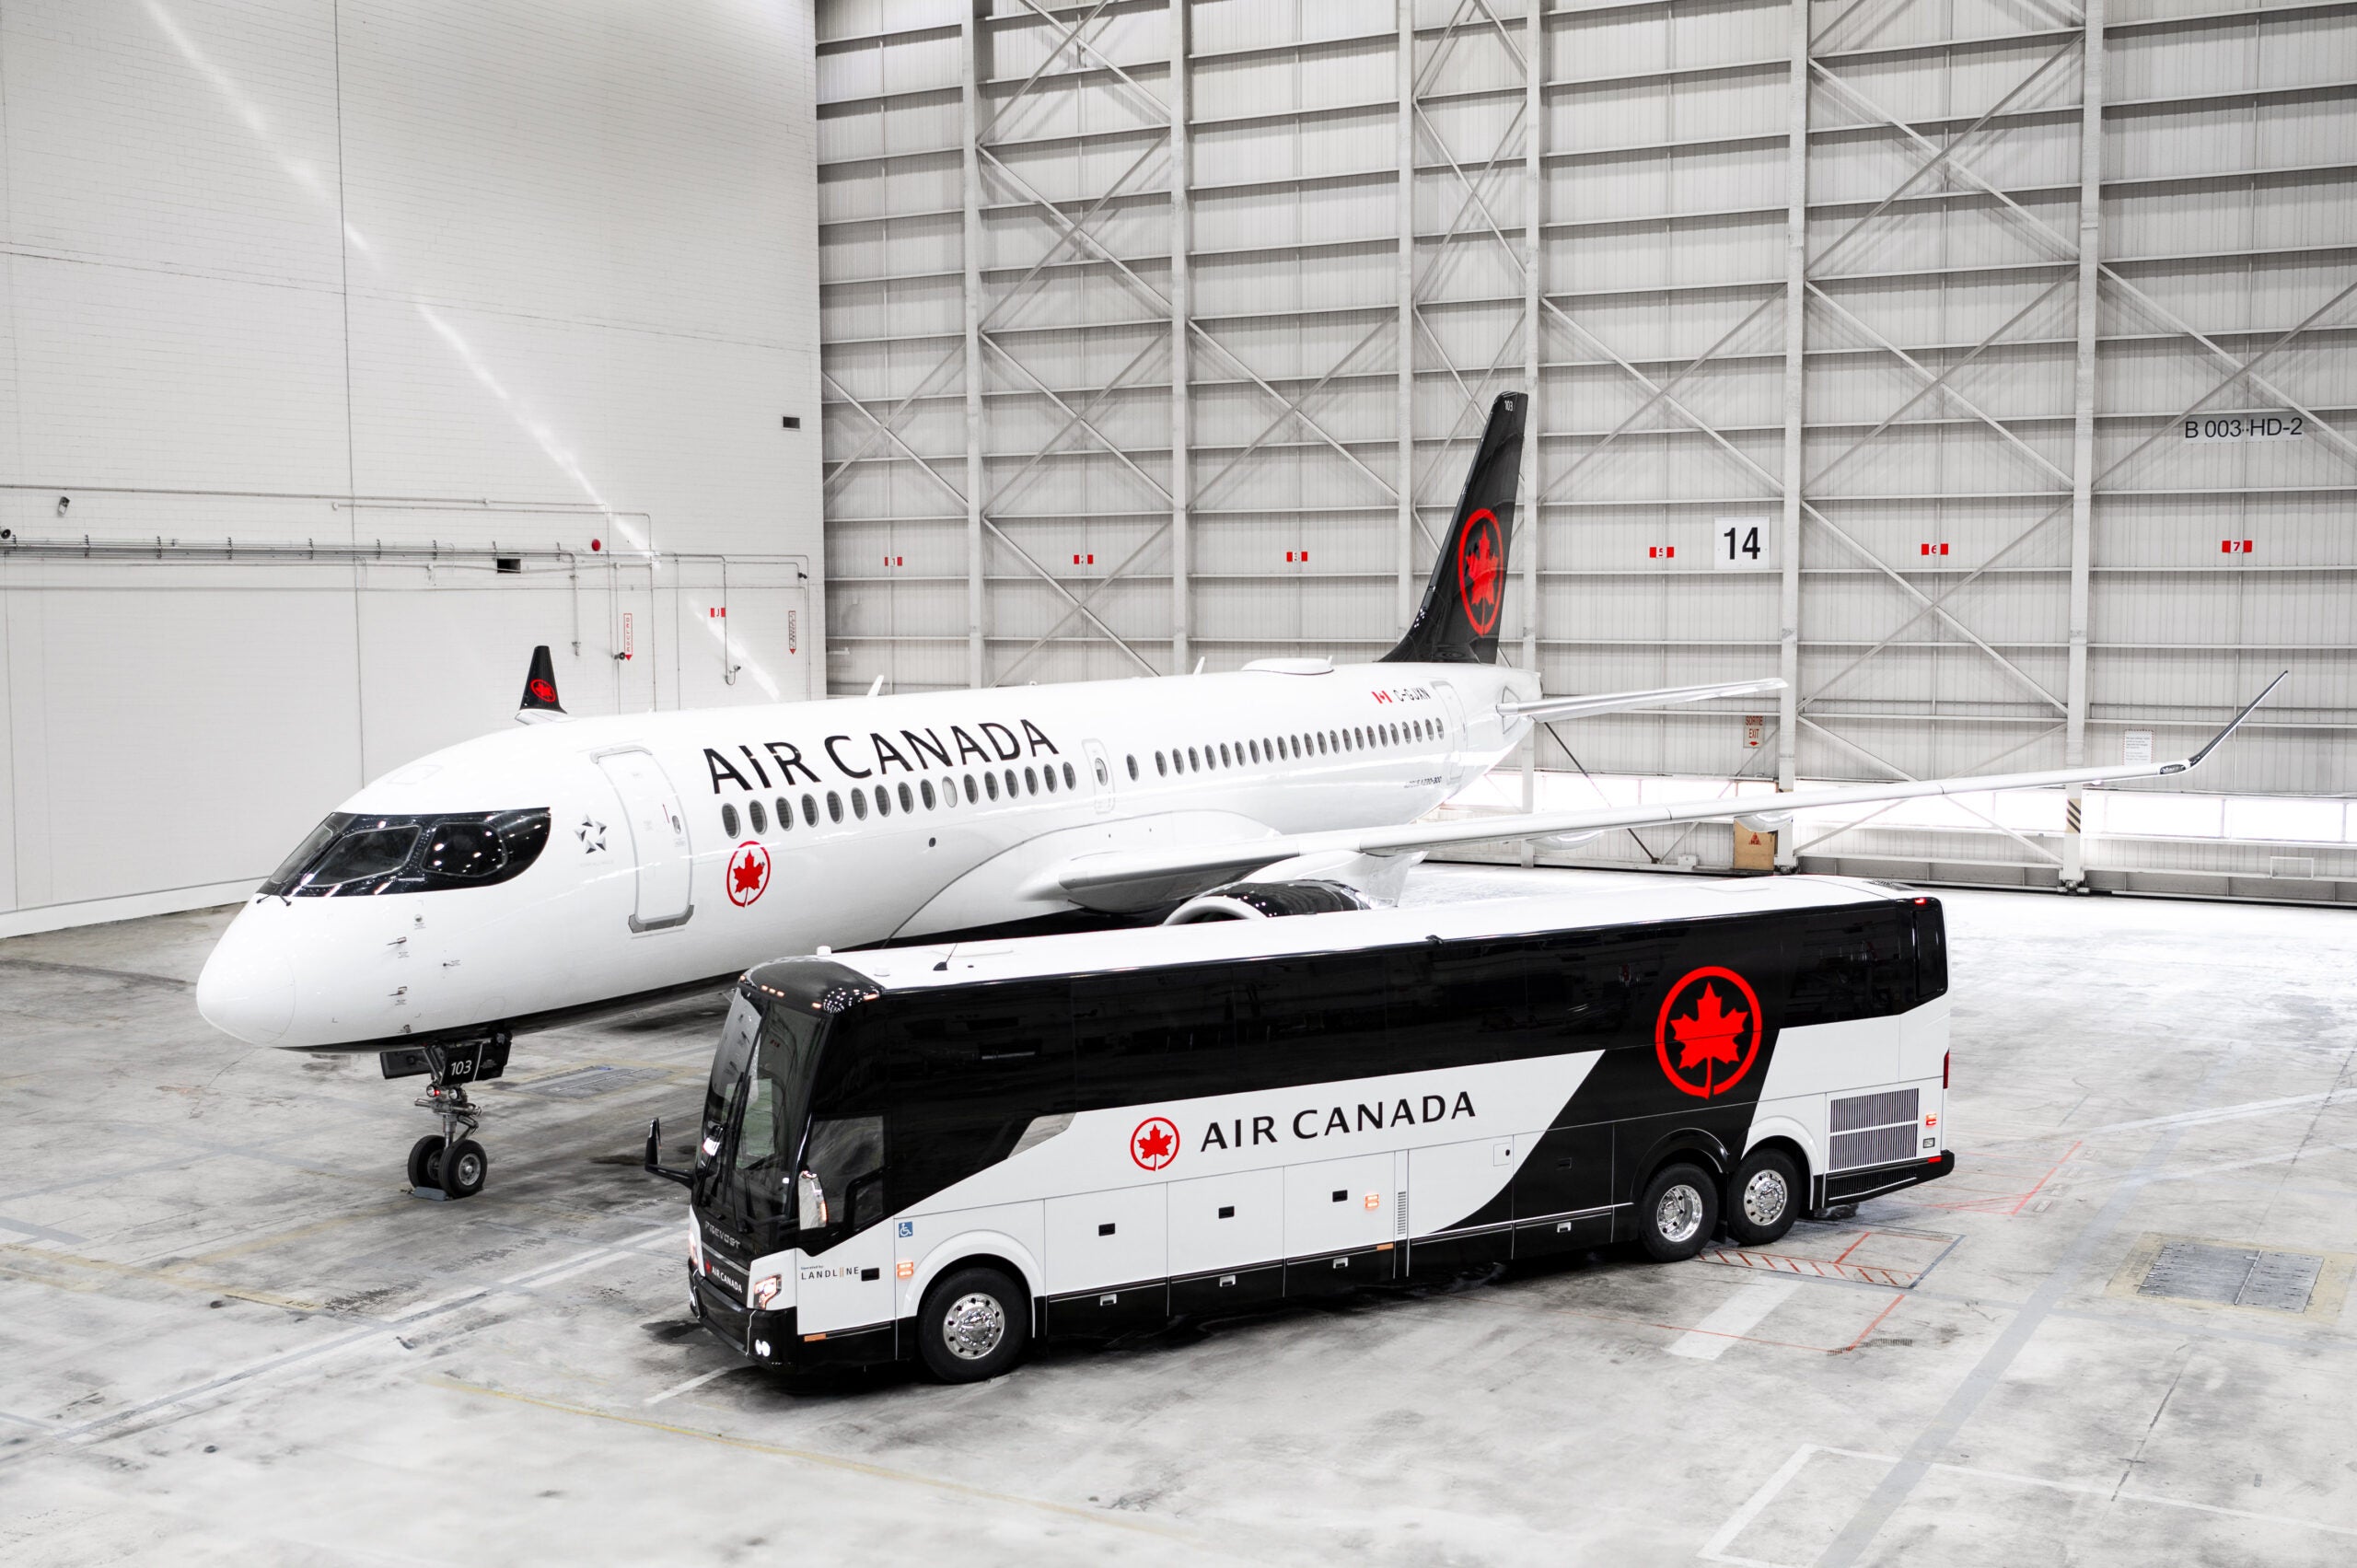 An image showing and Air Canada plane and an Air Canada-branded Landline bus.